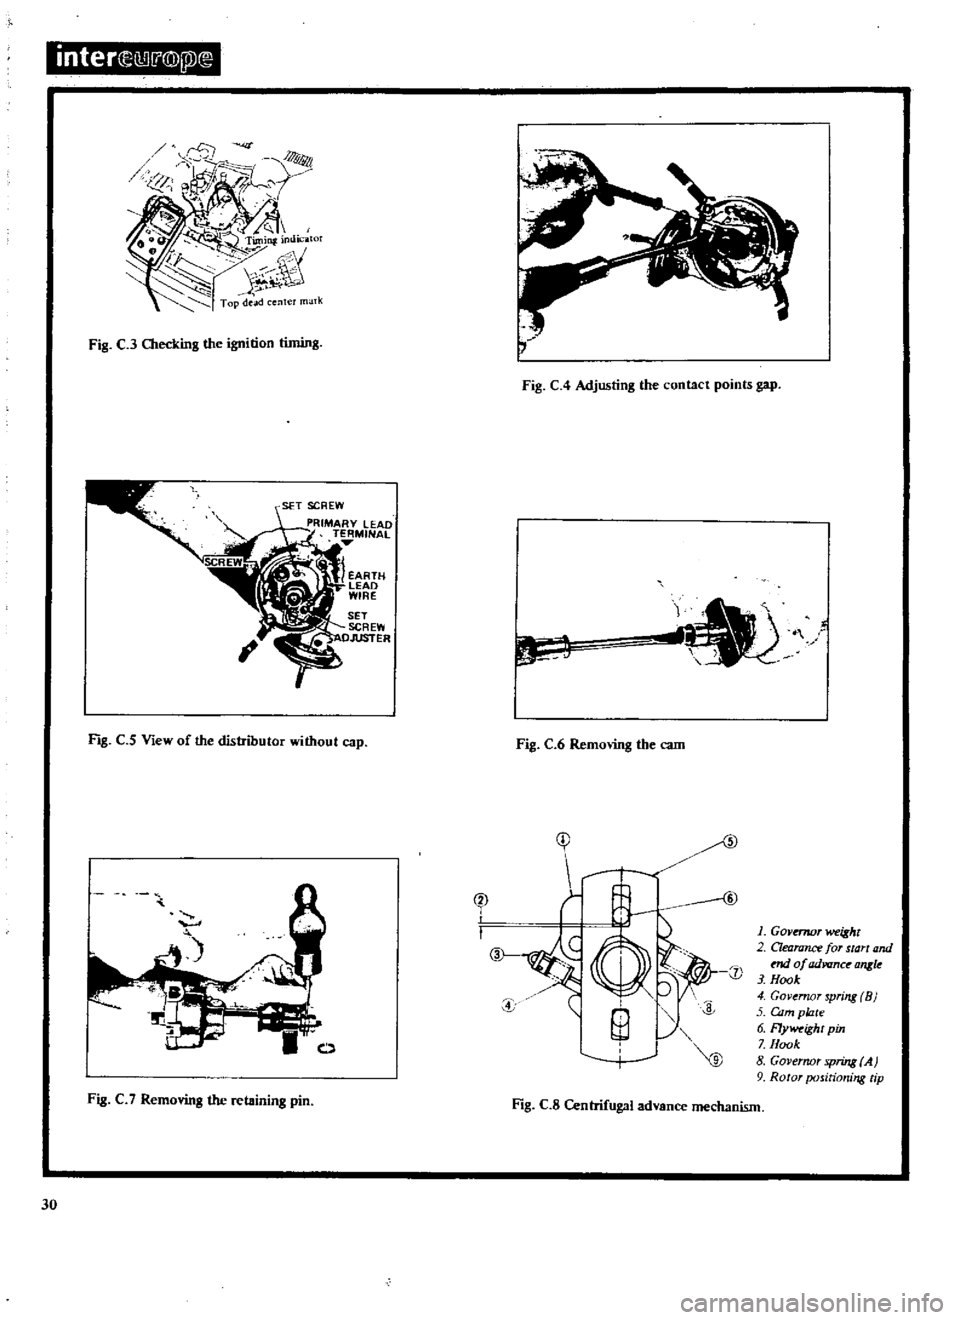 DATSUN 510 1969  Service Owners Guide 
inter 
i
D 
j

@
2l

Fig 
C 
3 
Checking 
the

ignition 
timing

J 
EARTH

LEAD

WIRE

SET

SCREW

OAmER

Fig 
C
5 
View 
of 
the 
distributor 
without

cap

Fig 
C 
7

Removing 
the

retaining 
pin
